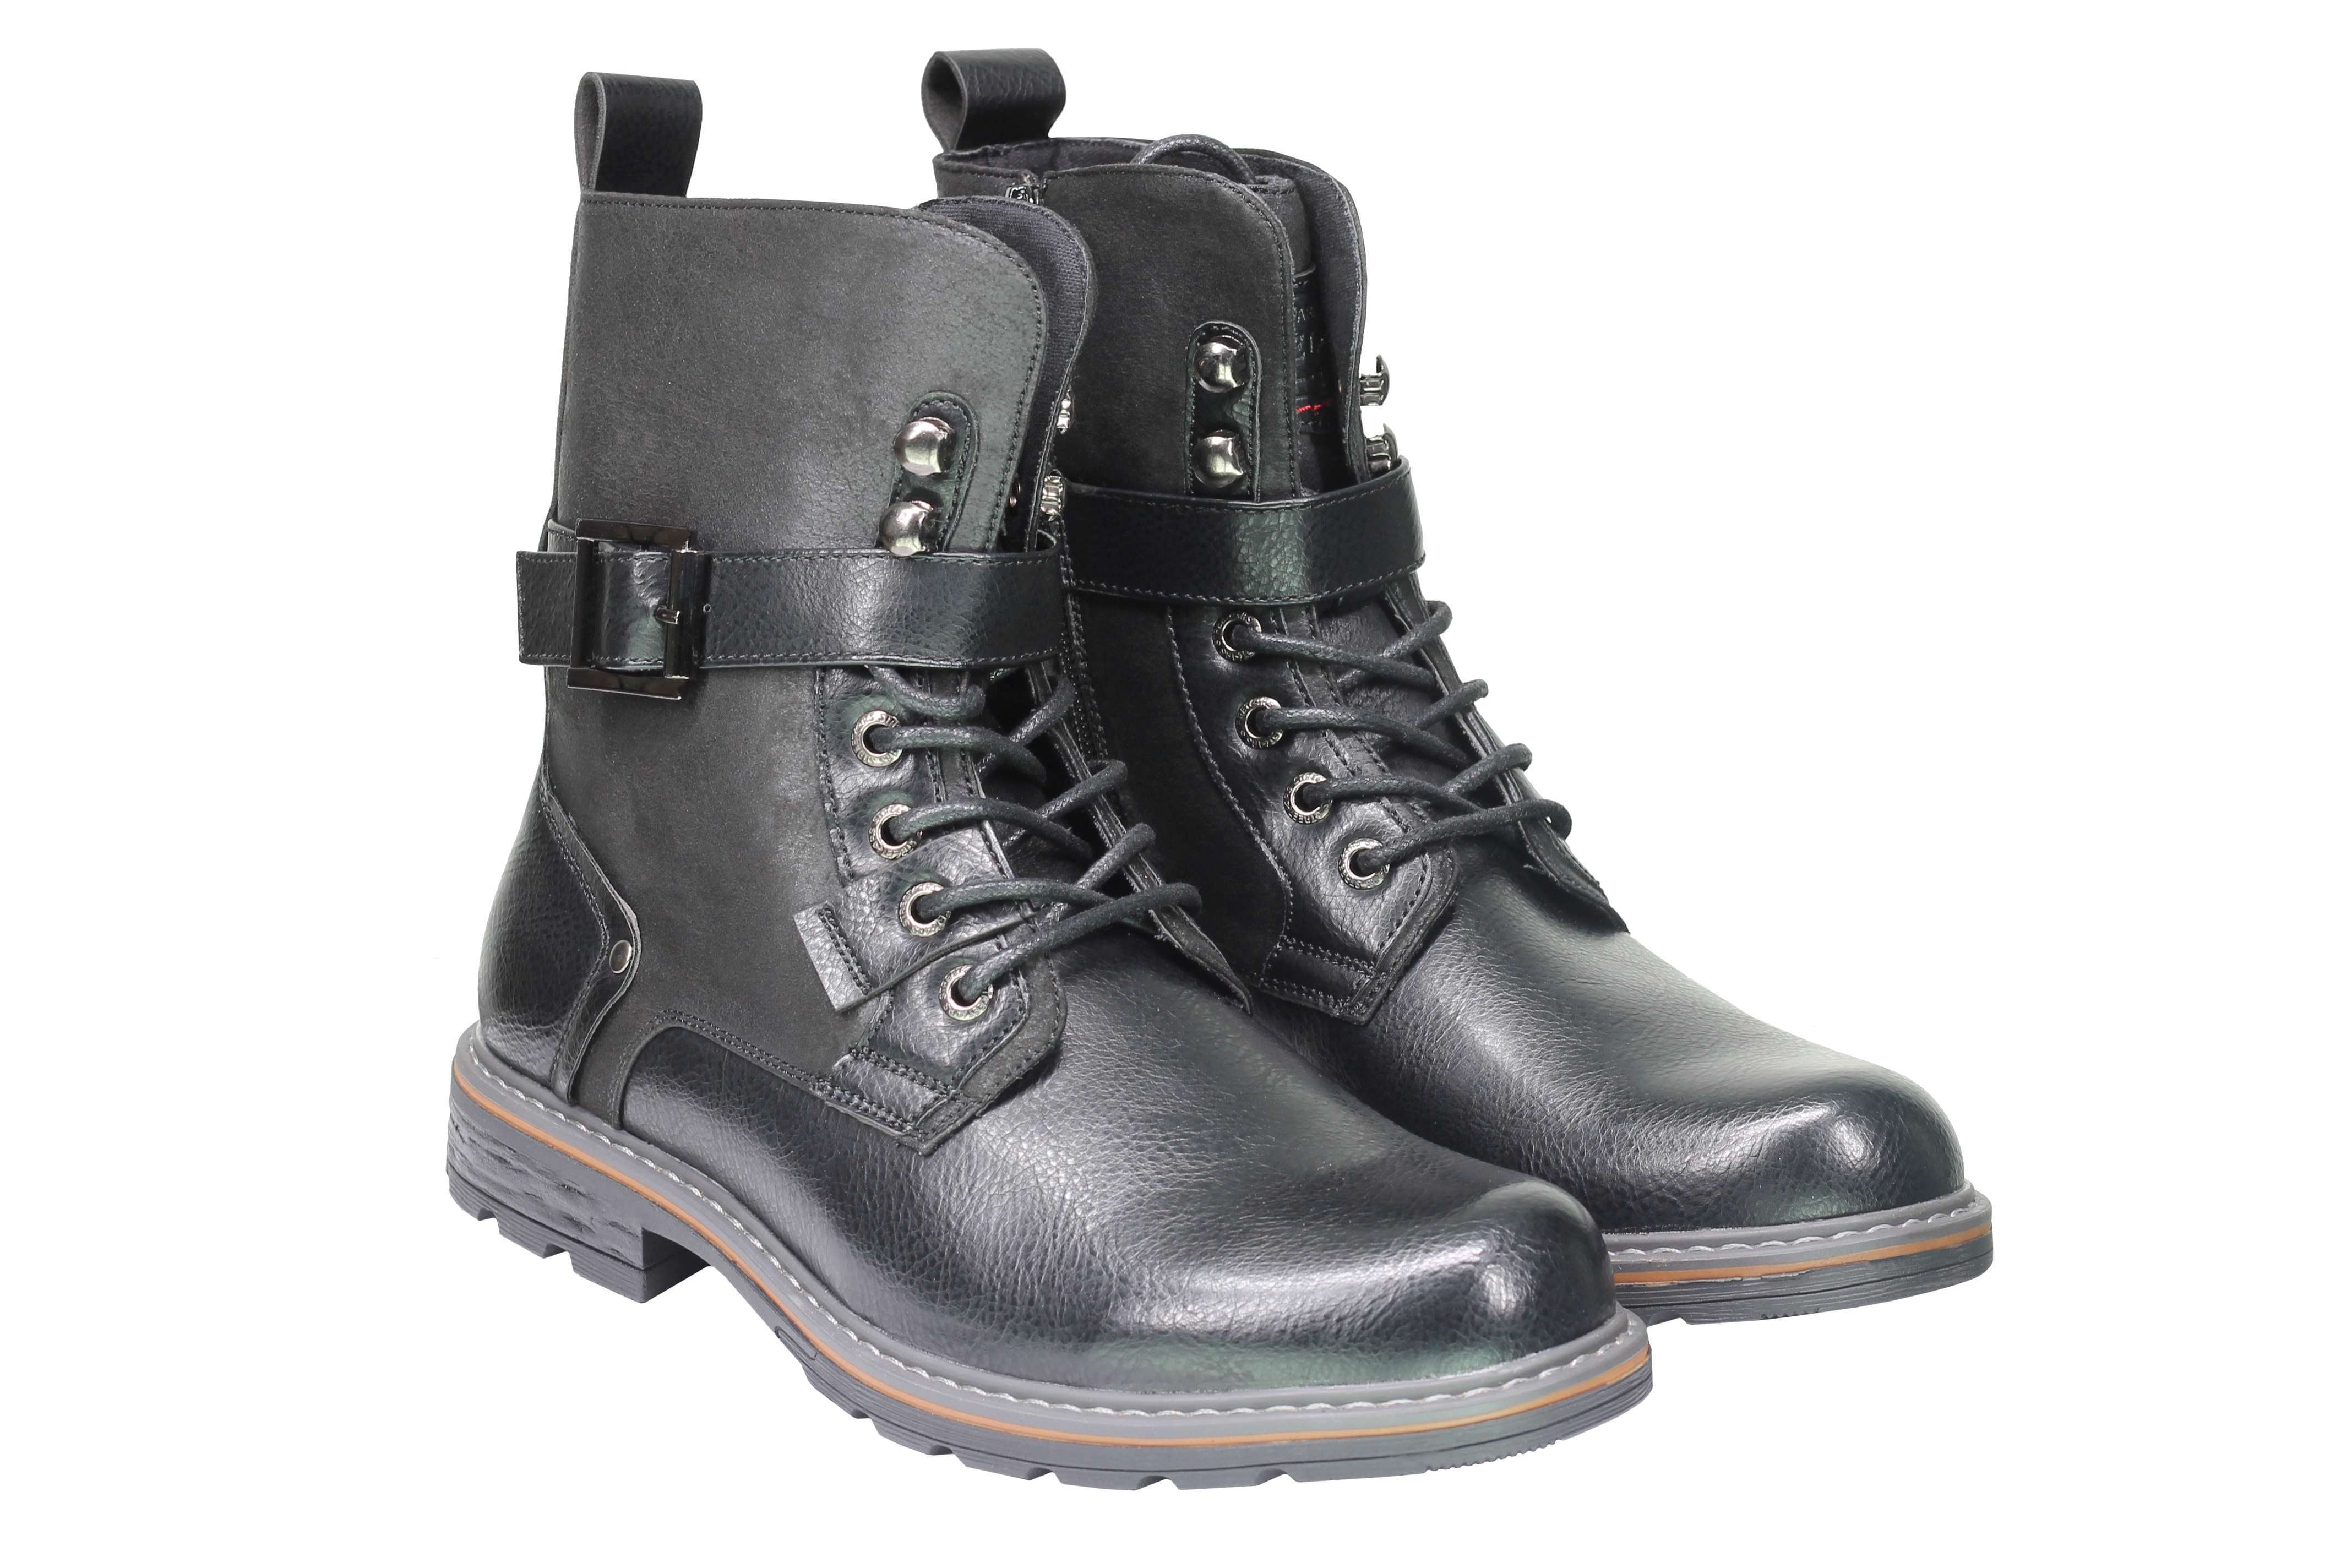 Mens Retro Biker Boots Pu Leather 6 Ankle Lace Up Side Zip Army Military Shoes